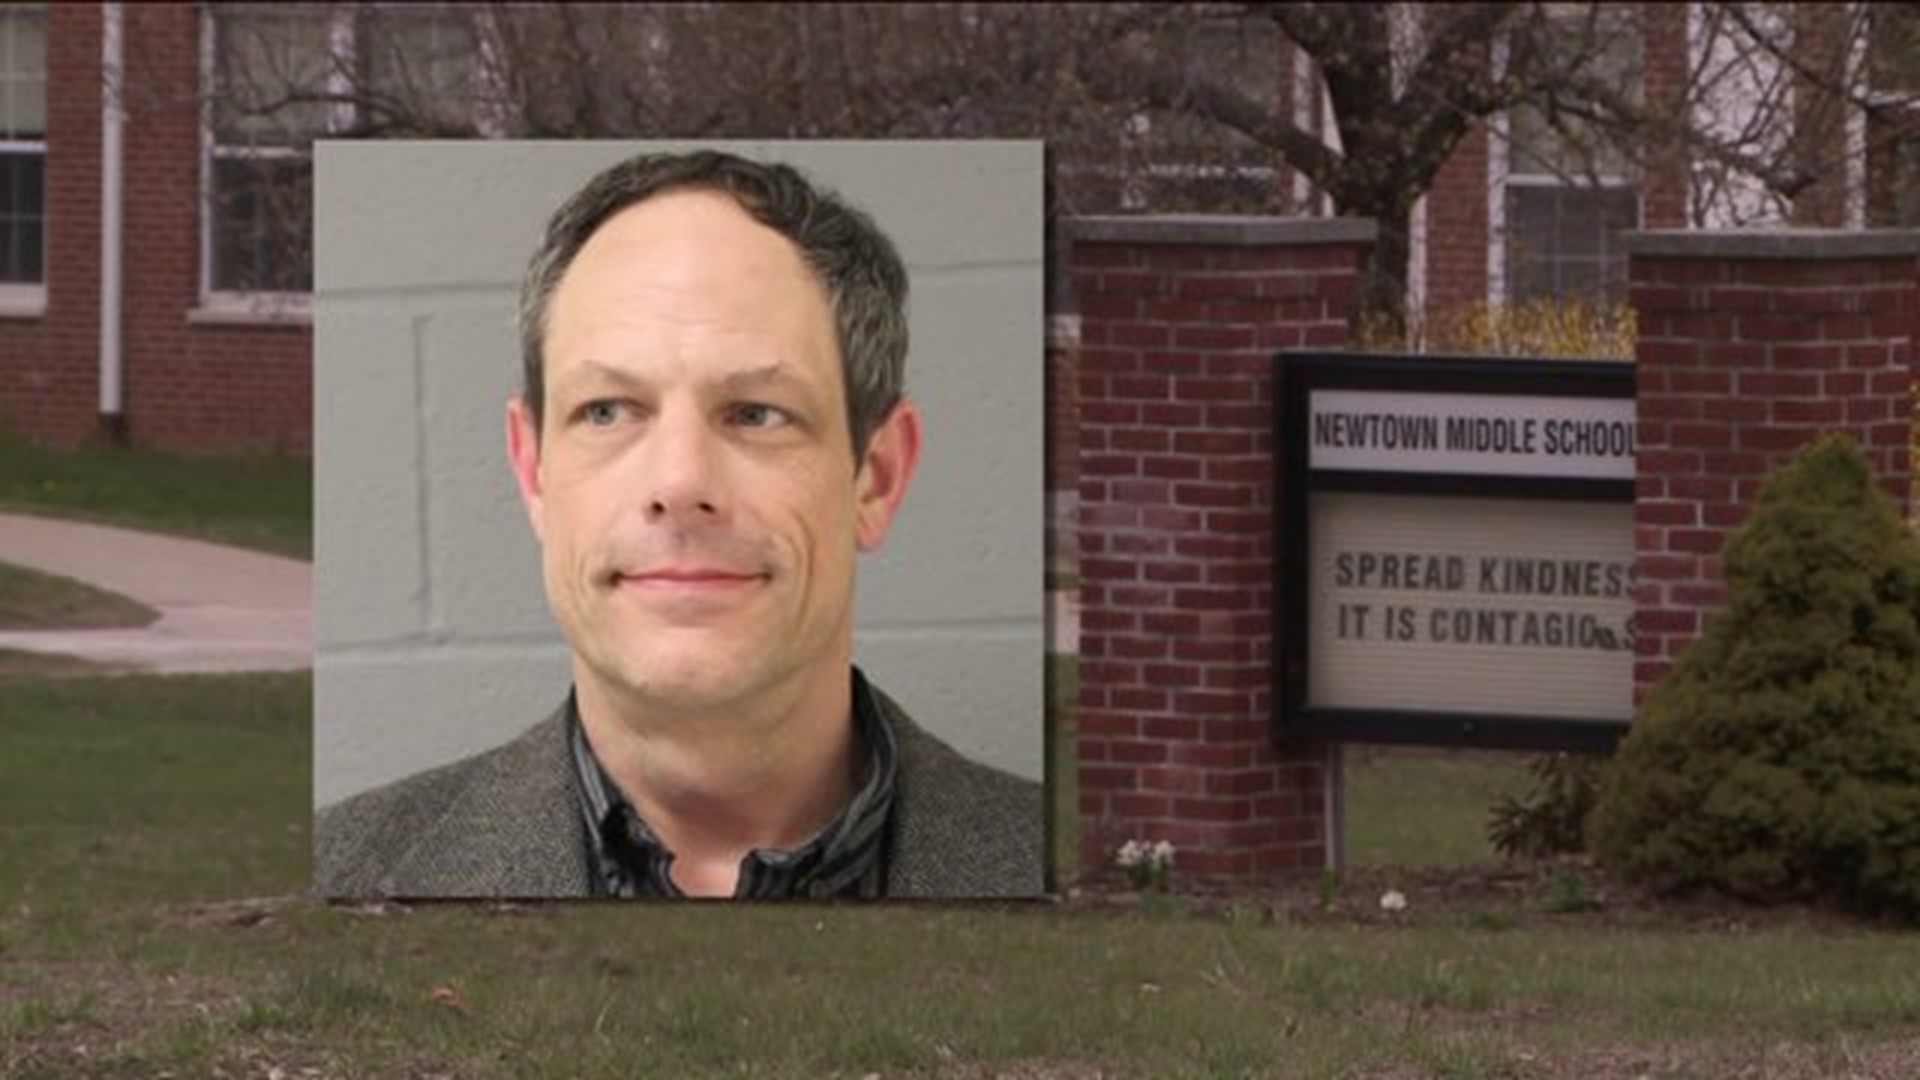 Investigation launched after teacher who brought gun to Newtown Middle School arrested